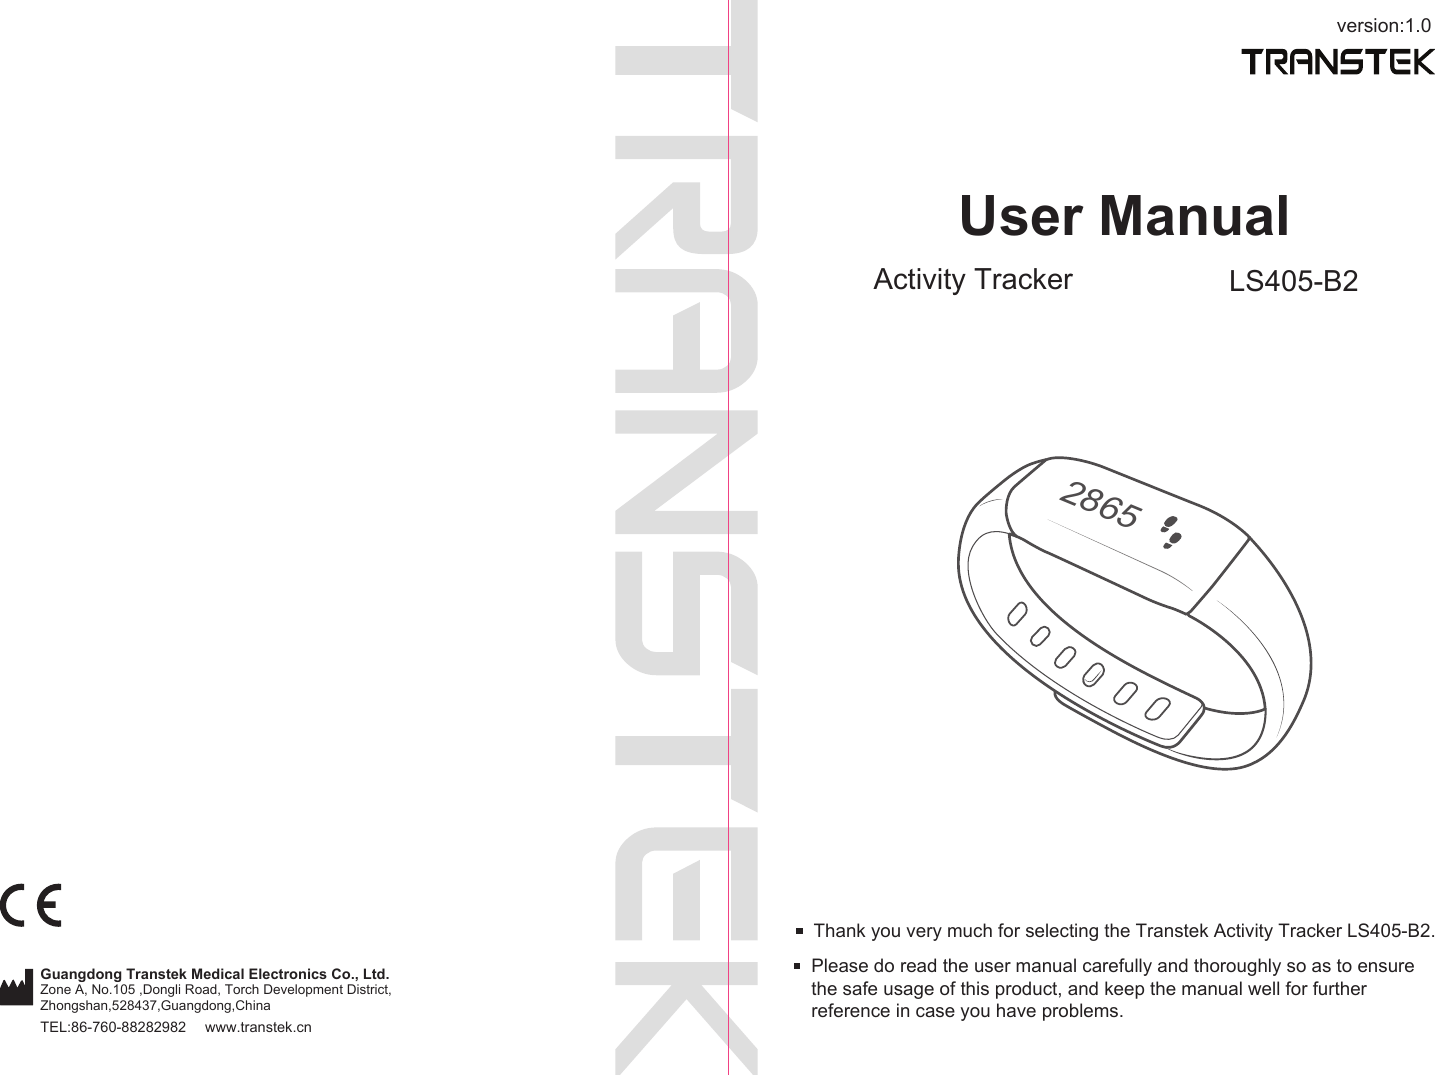 version:1.0TEL:86-760-88282982  www.transtek.cnUser ManualActivity Tracker LS405-B2Please do read the user manual carefully and thoroughly so as to ensure the safe usage of this product, and keep the manual well for further reference in case you have problems.Thank you very much for selecting the Transtek Activity Tracker LS405-B2.2865Guangdong Transtek Medical Electronics Co., Ltd.Zone A, No.105 ,Dongli Road, Torch Development District, Zhongshan,528437,Guangdong,China  